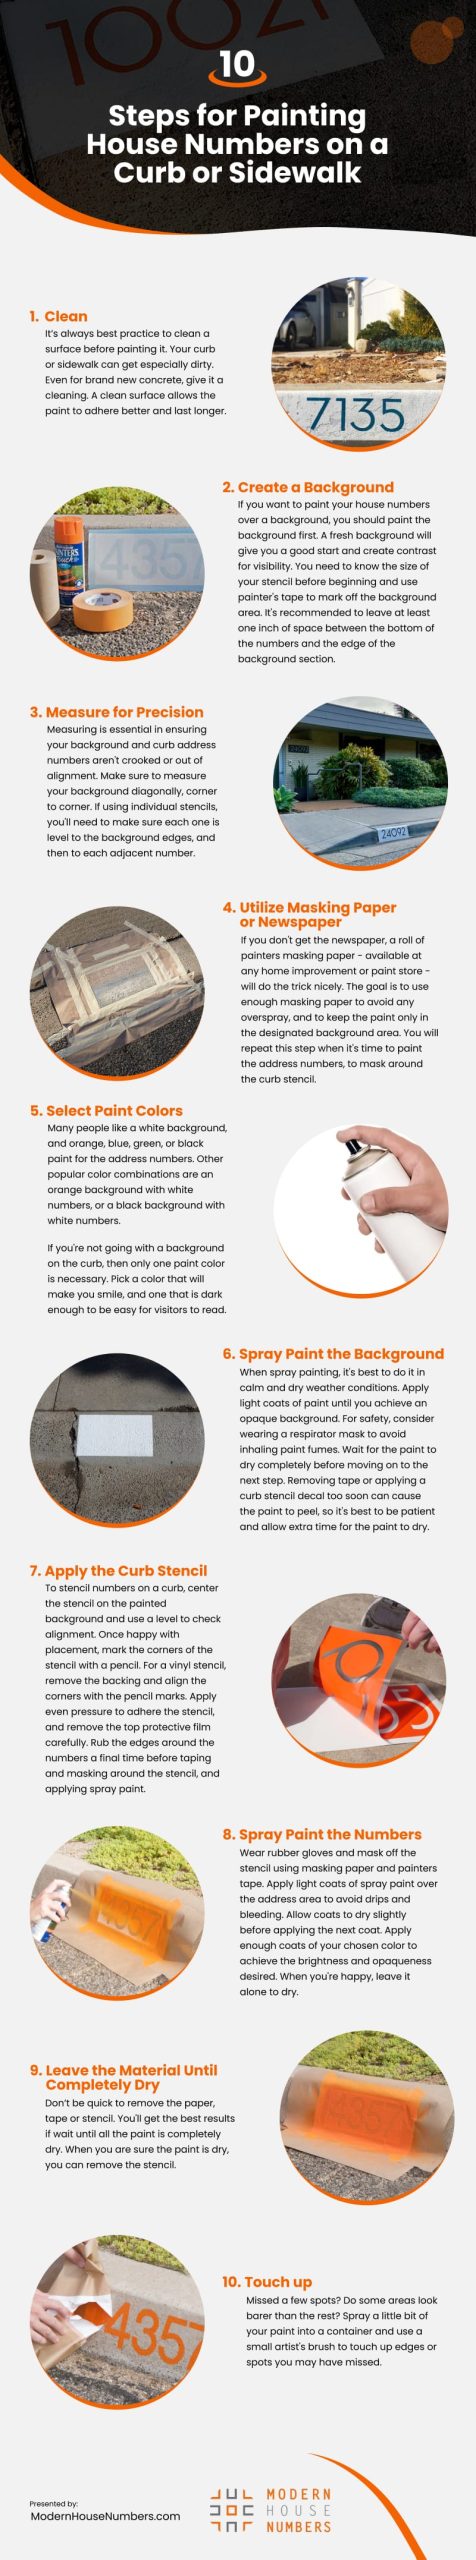 10 Steps for Painting House Numbers on a Curb or Sidewalk Infographic